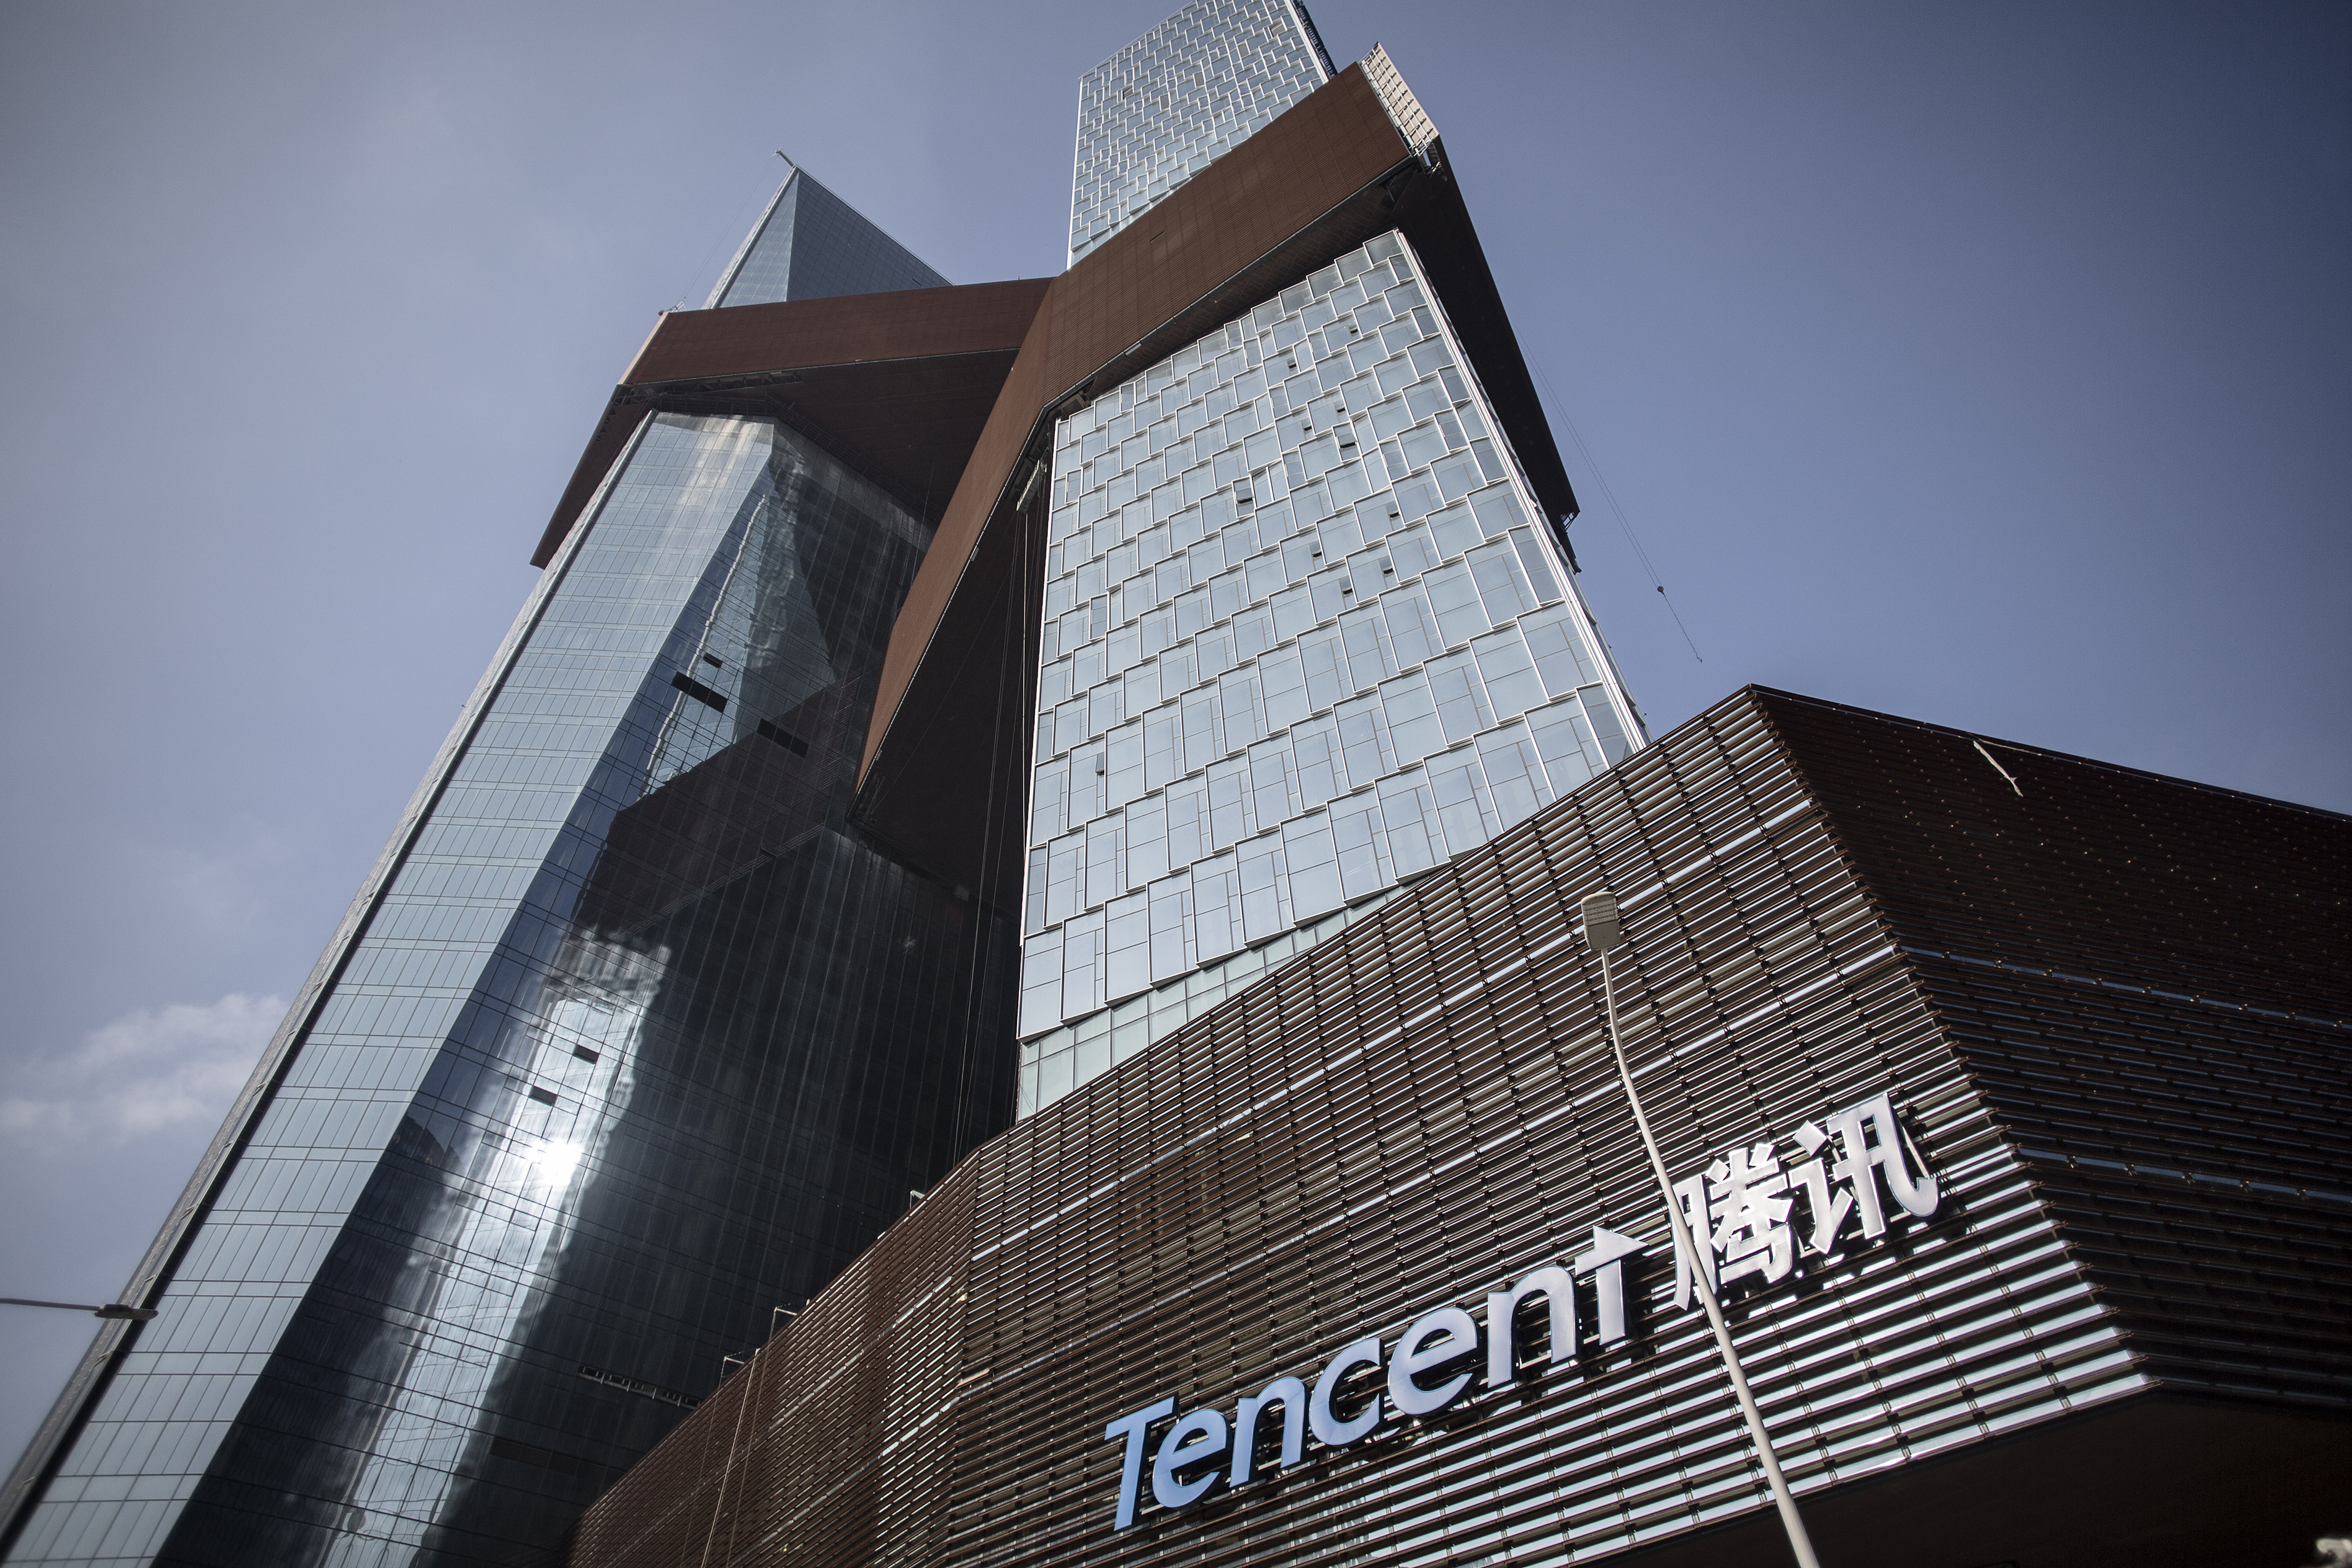 Tencent launches $100M fund to fight COVID-19